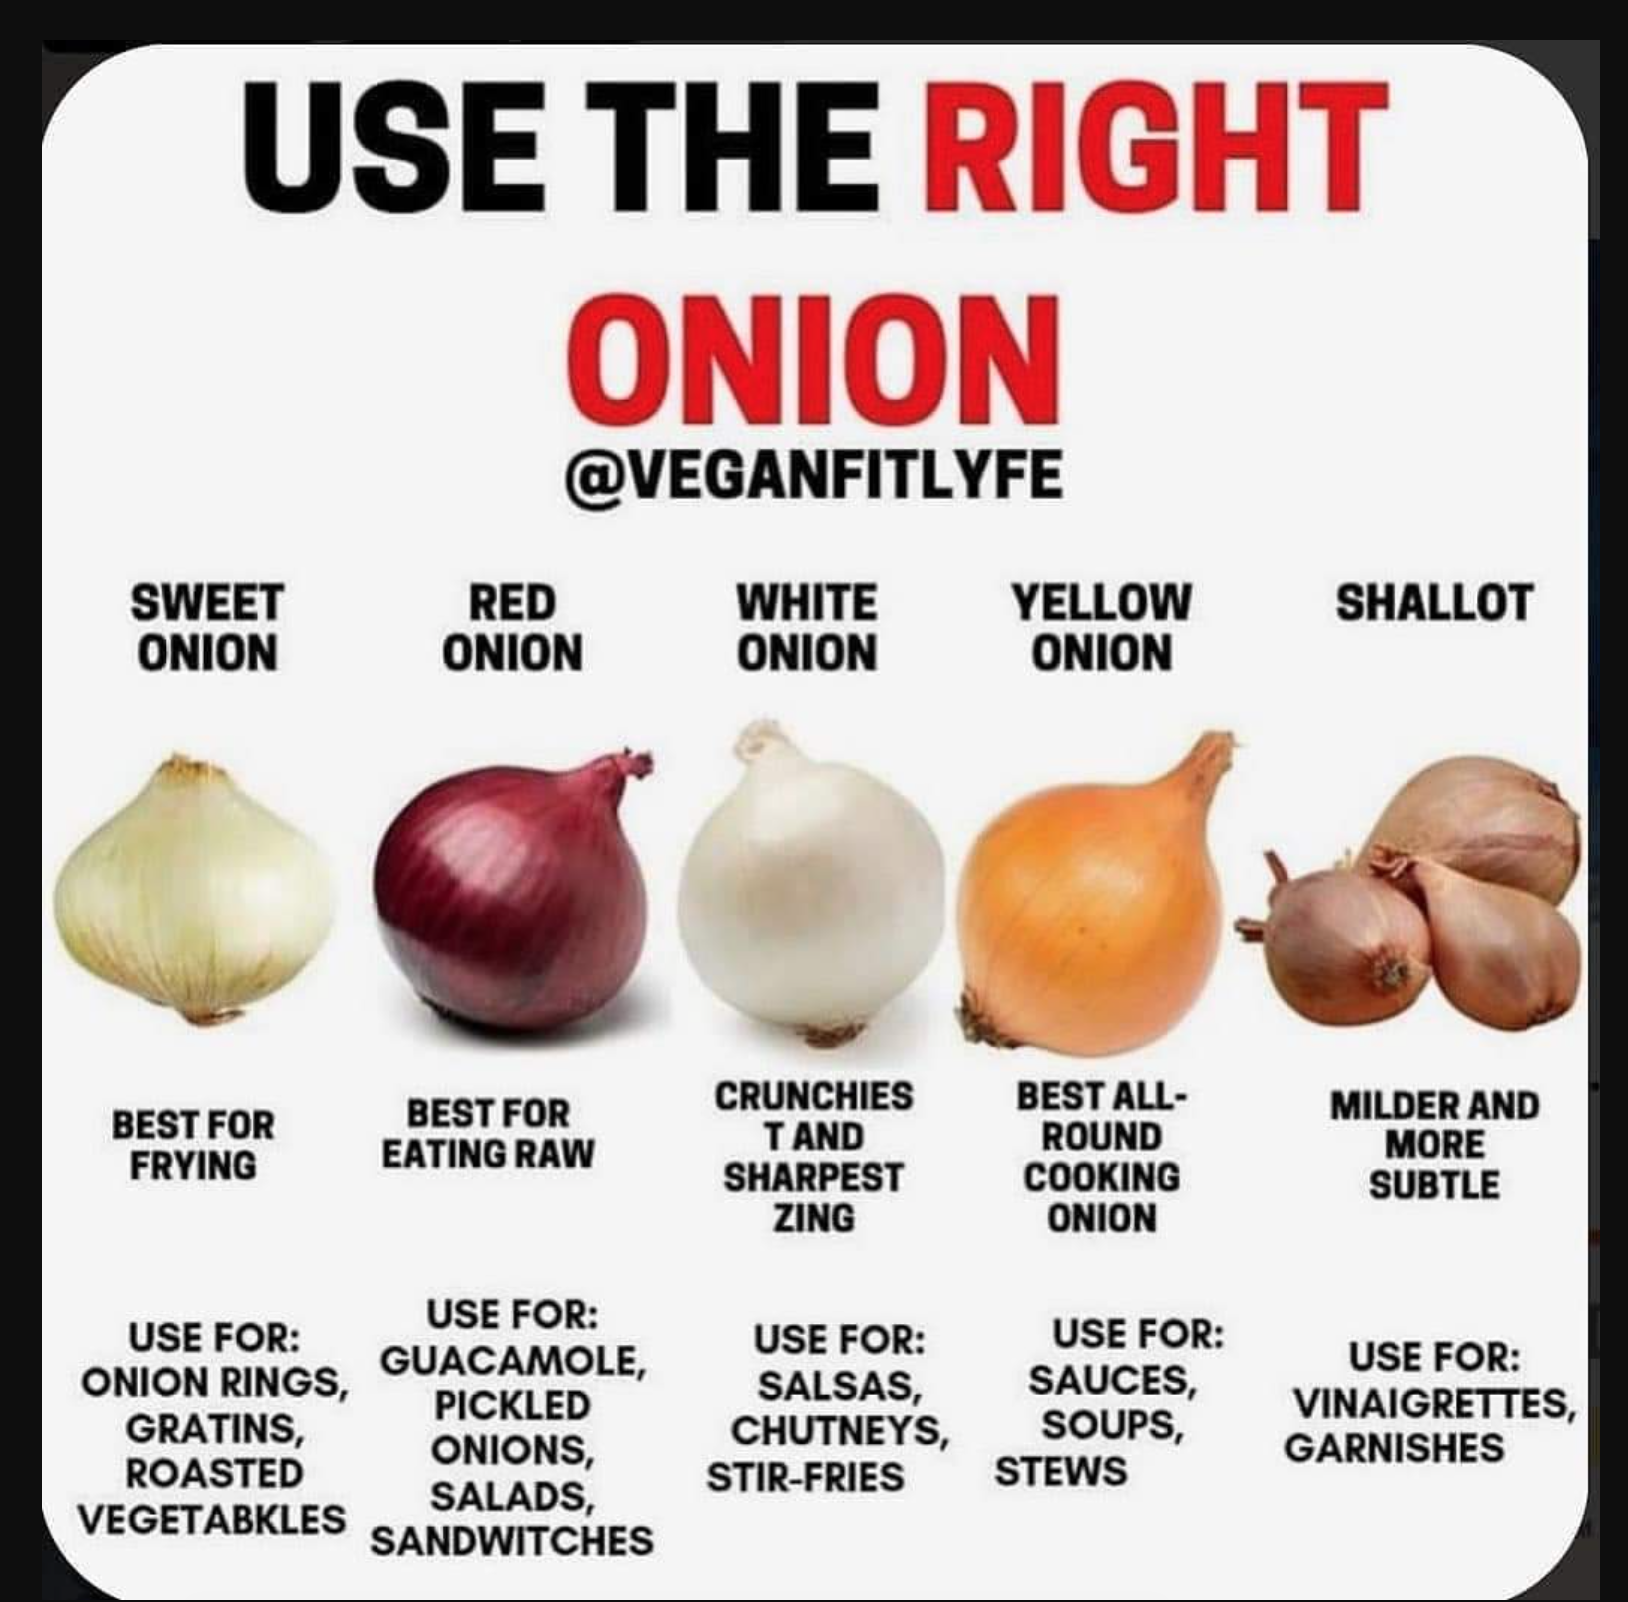 Helpful Guides to life - onion guide - Use The Right Onion Sweet Onion Red Onion White Onion Yellow Onion Shallot Best For Frying Best For Eating Raw Crunchies T And Sharpest Zing Best All Round Cooking Onion Milder And More Subtle Use For Use For Onion R